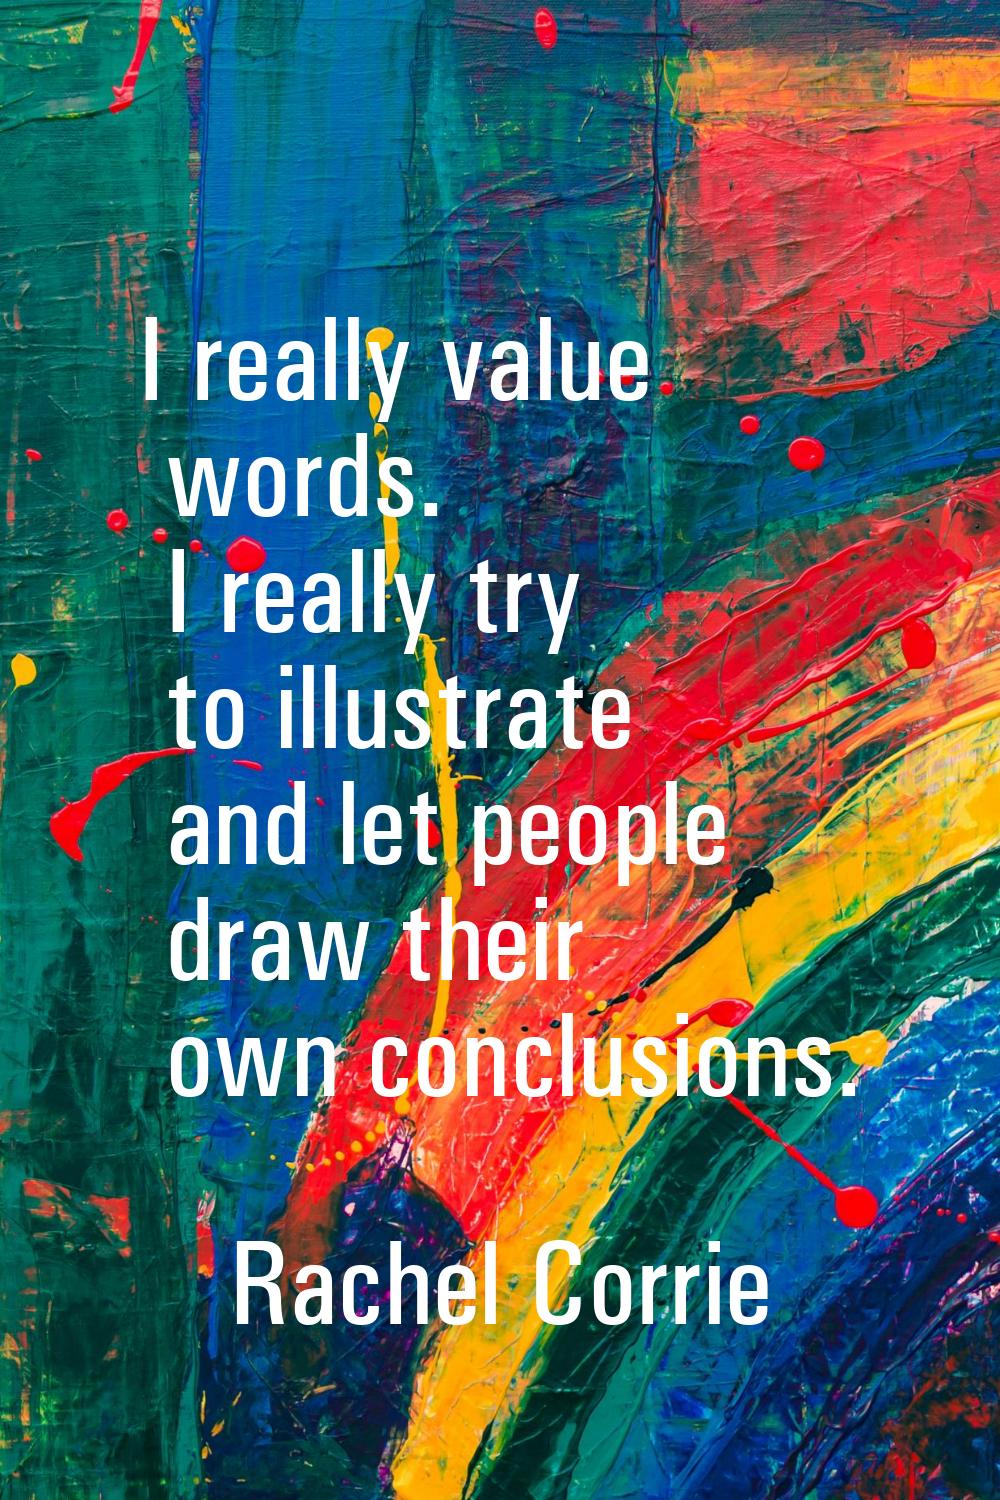 I really value words. I really try to illustrate and let people draw their own conclusions.